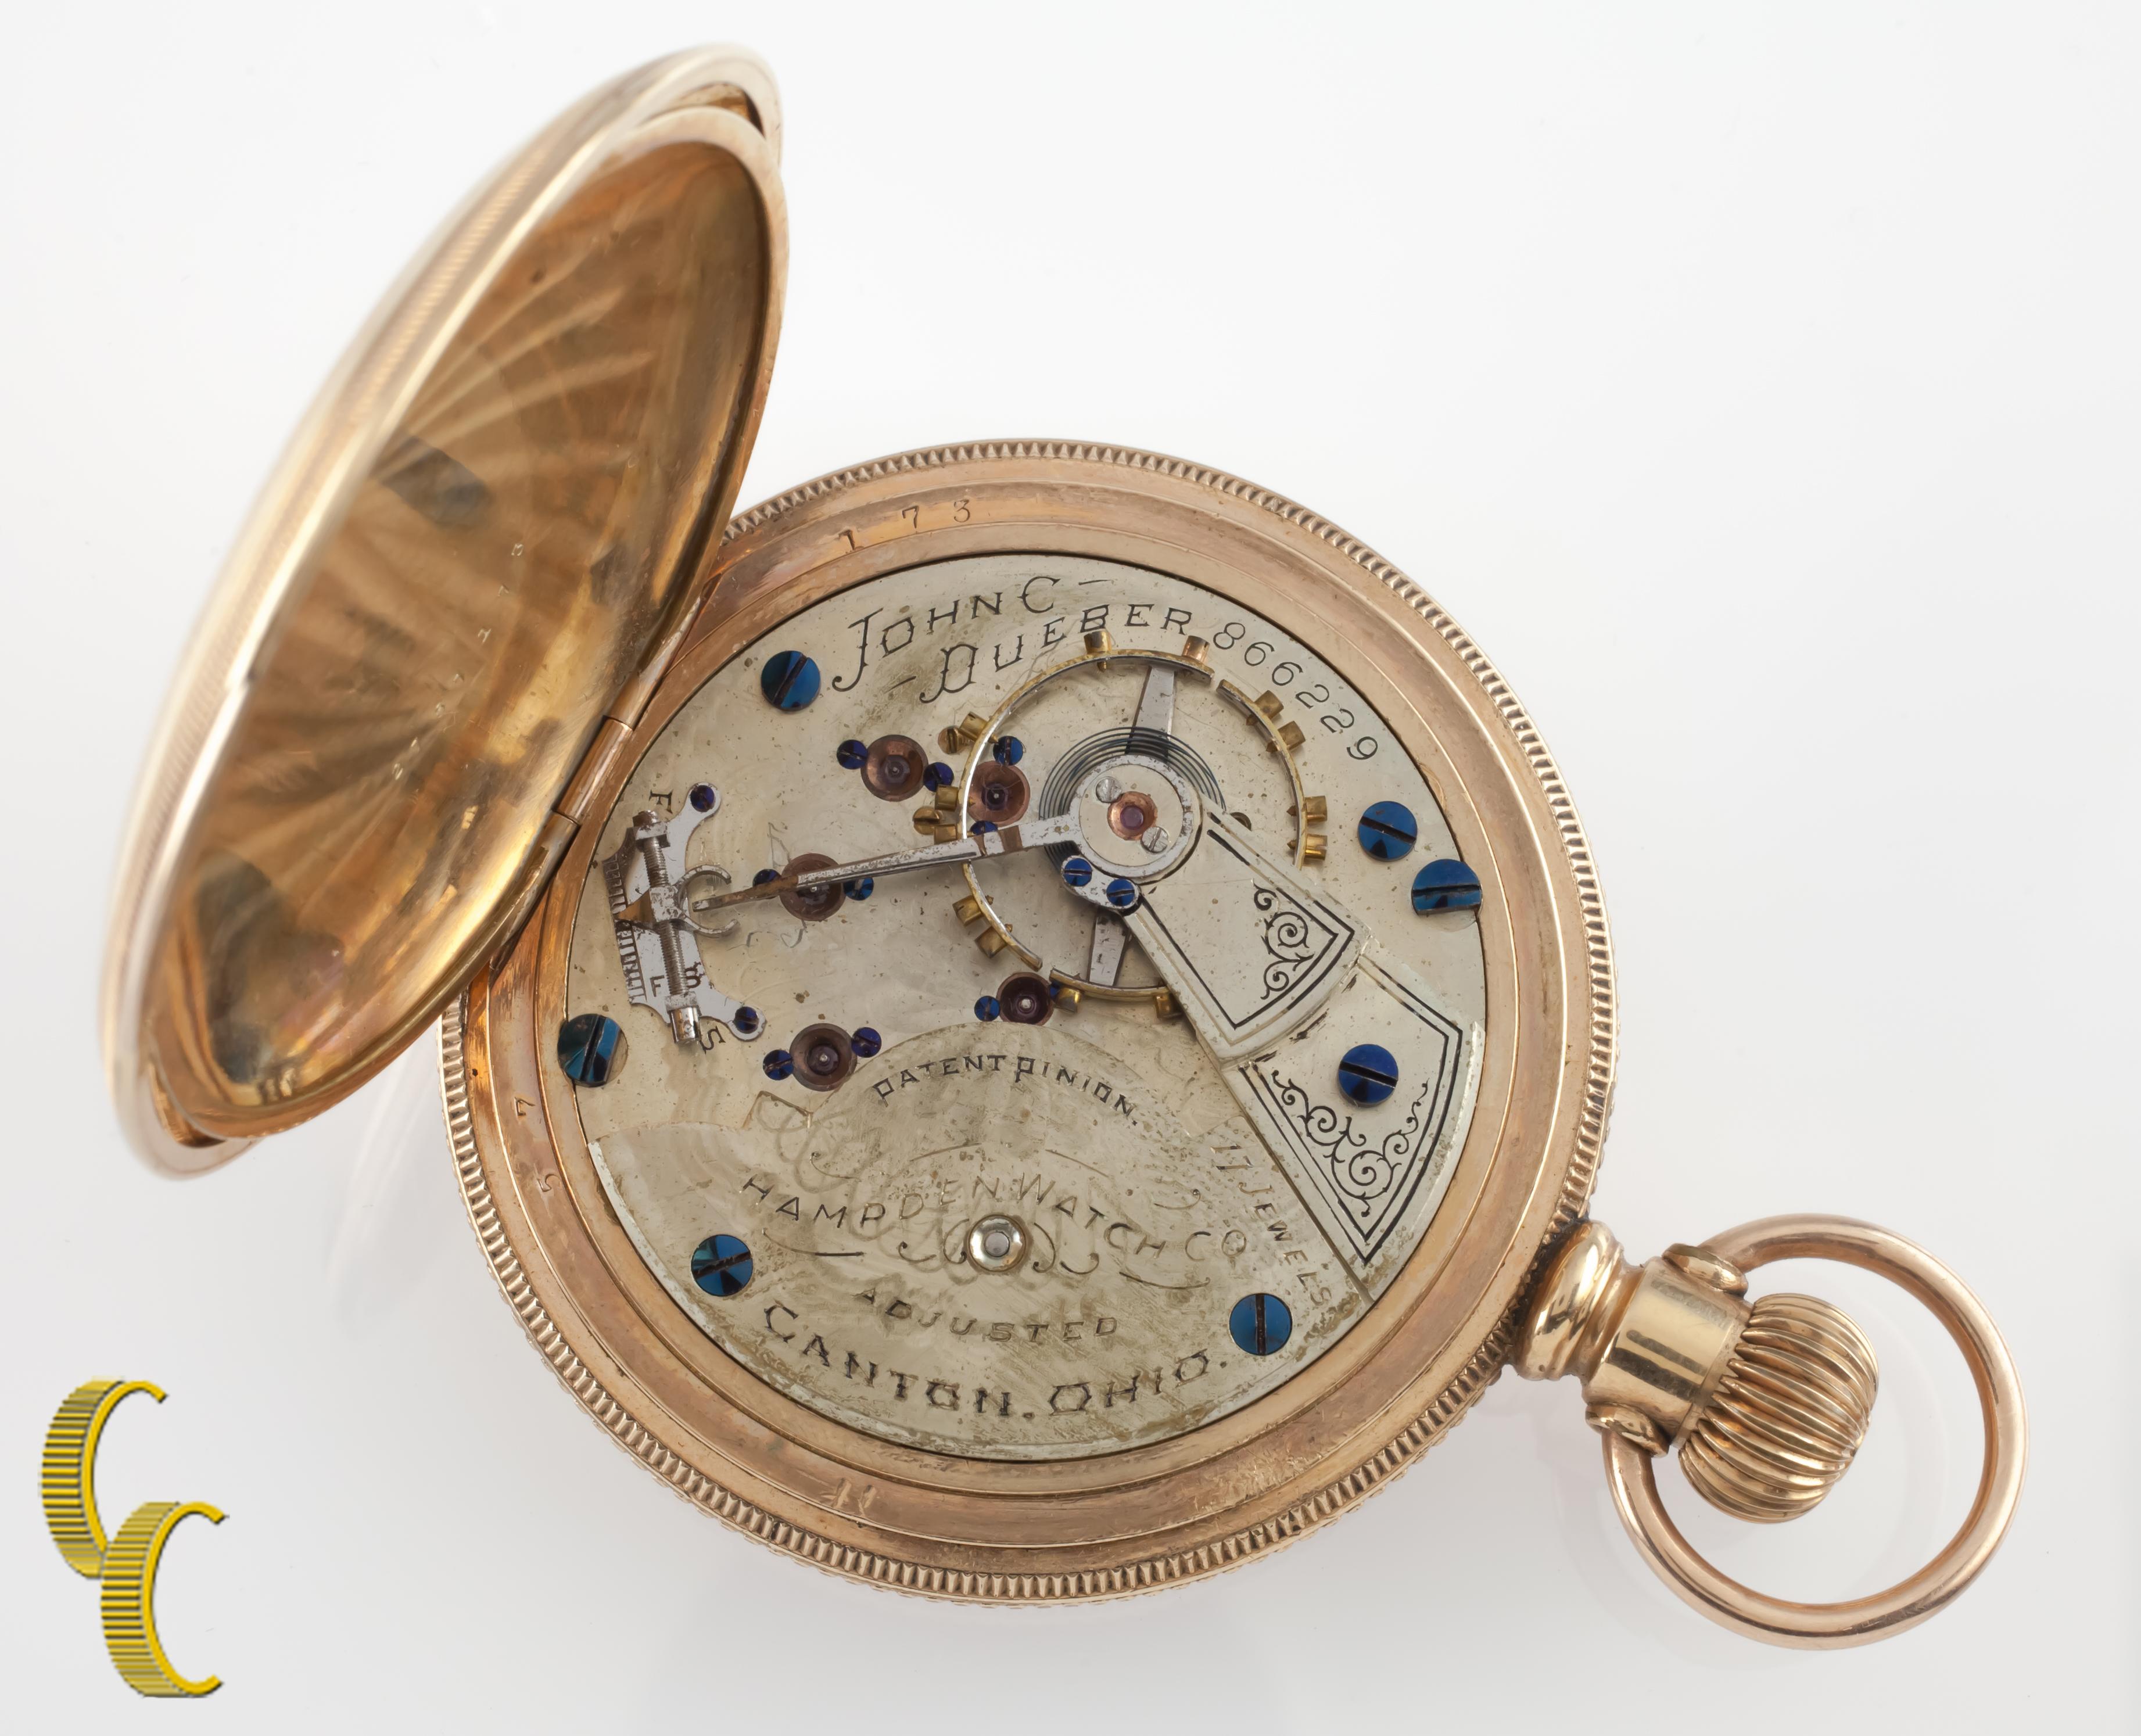 Beautiful Antique Hampden Pocket Watch w/ White Dial Including Black Hands & Dedicated Second Dial
14K Yellow Gold Case w/ Intricate Hand-Etched Design on Case
Black Roman Numerals
Case Serial # 2757173
17-Jewel Hampden Movement Serial #